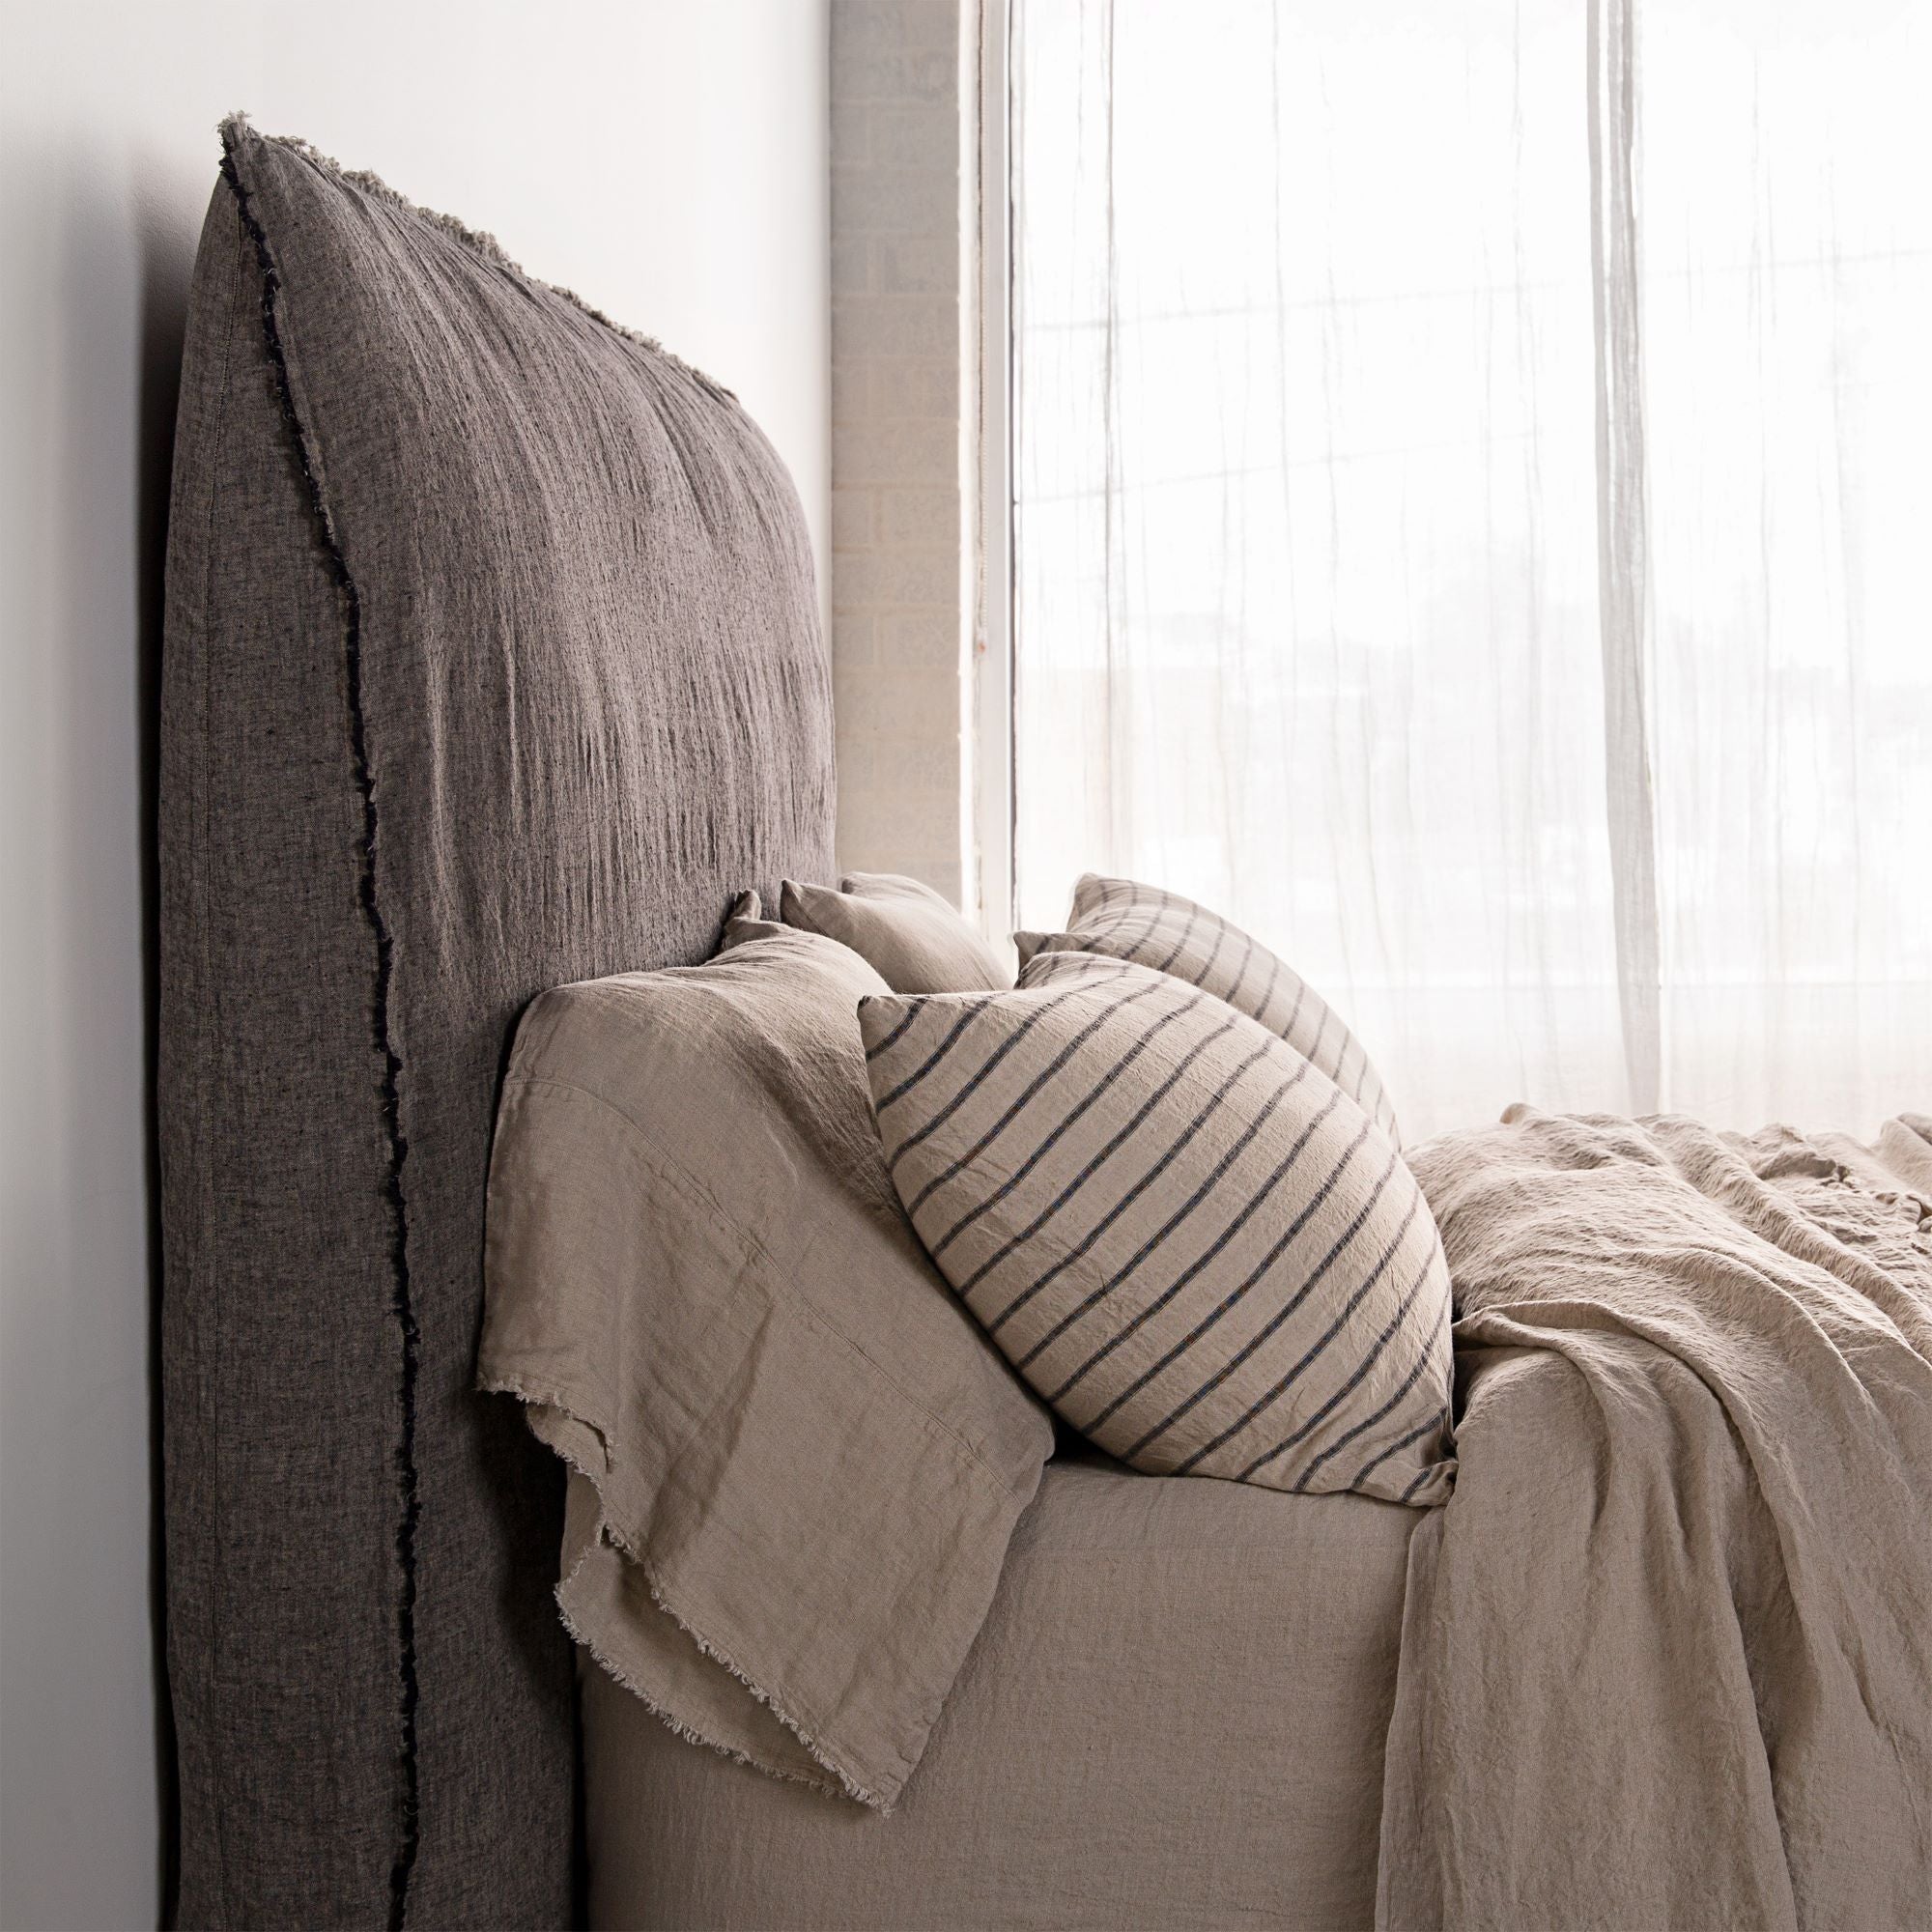 Linen Bedhead & Cover | Muted Black  | Hale Mercantile Co.